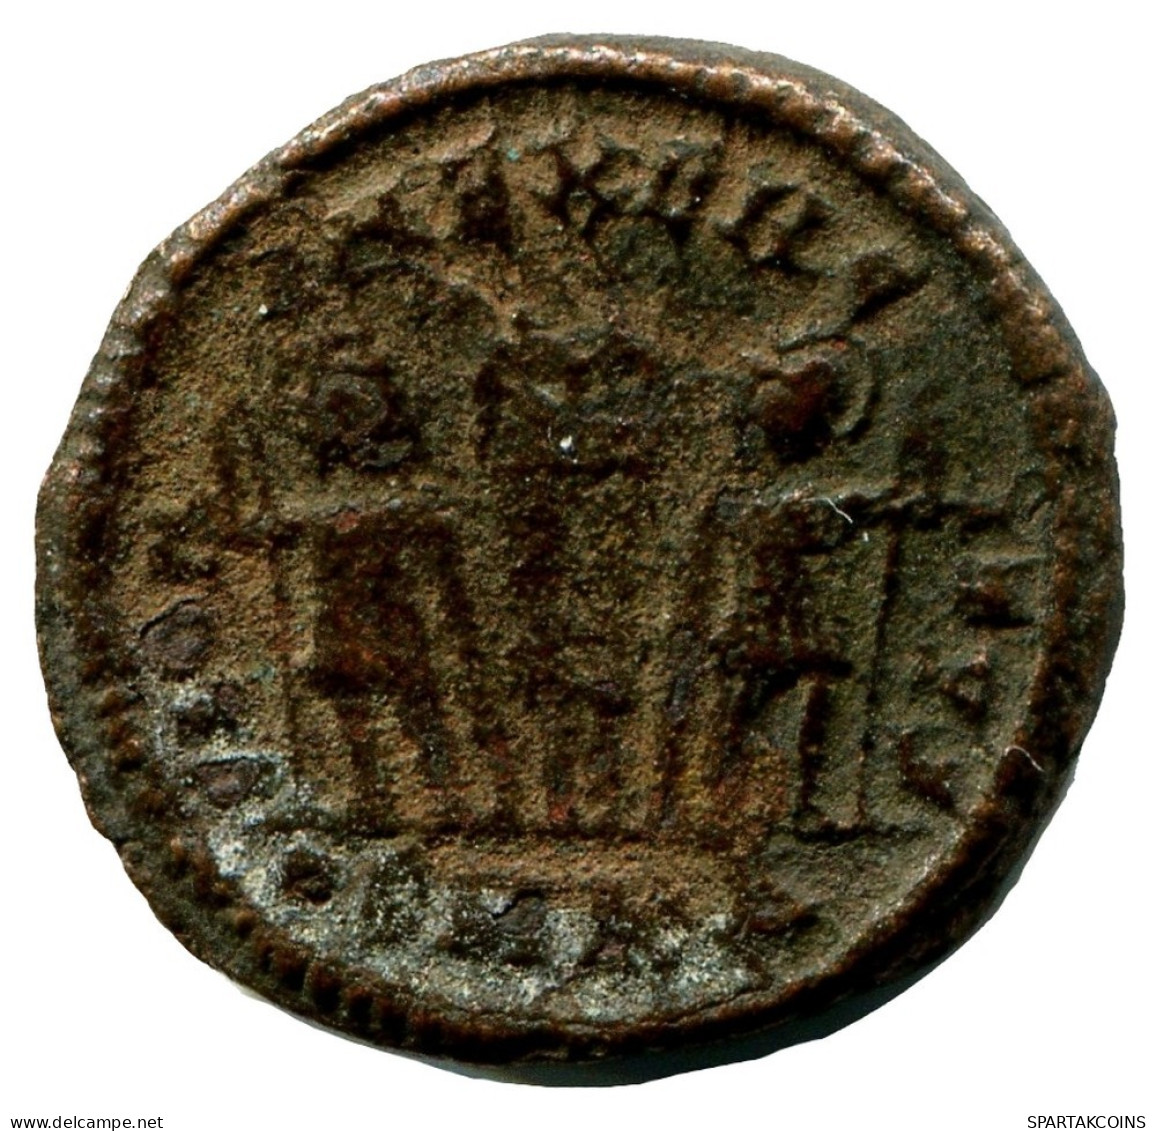 CONSTANTINE I MINTED IN CYZICUS FROM THE ROYAL ONTARIO MUSEUM #ANC11017.14.U.A - L'Empire Chrétien (307 à 363)